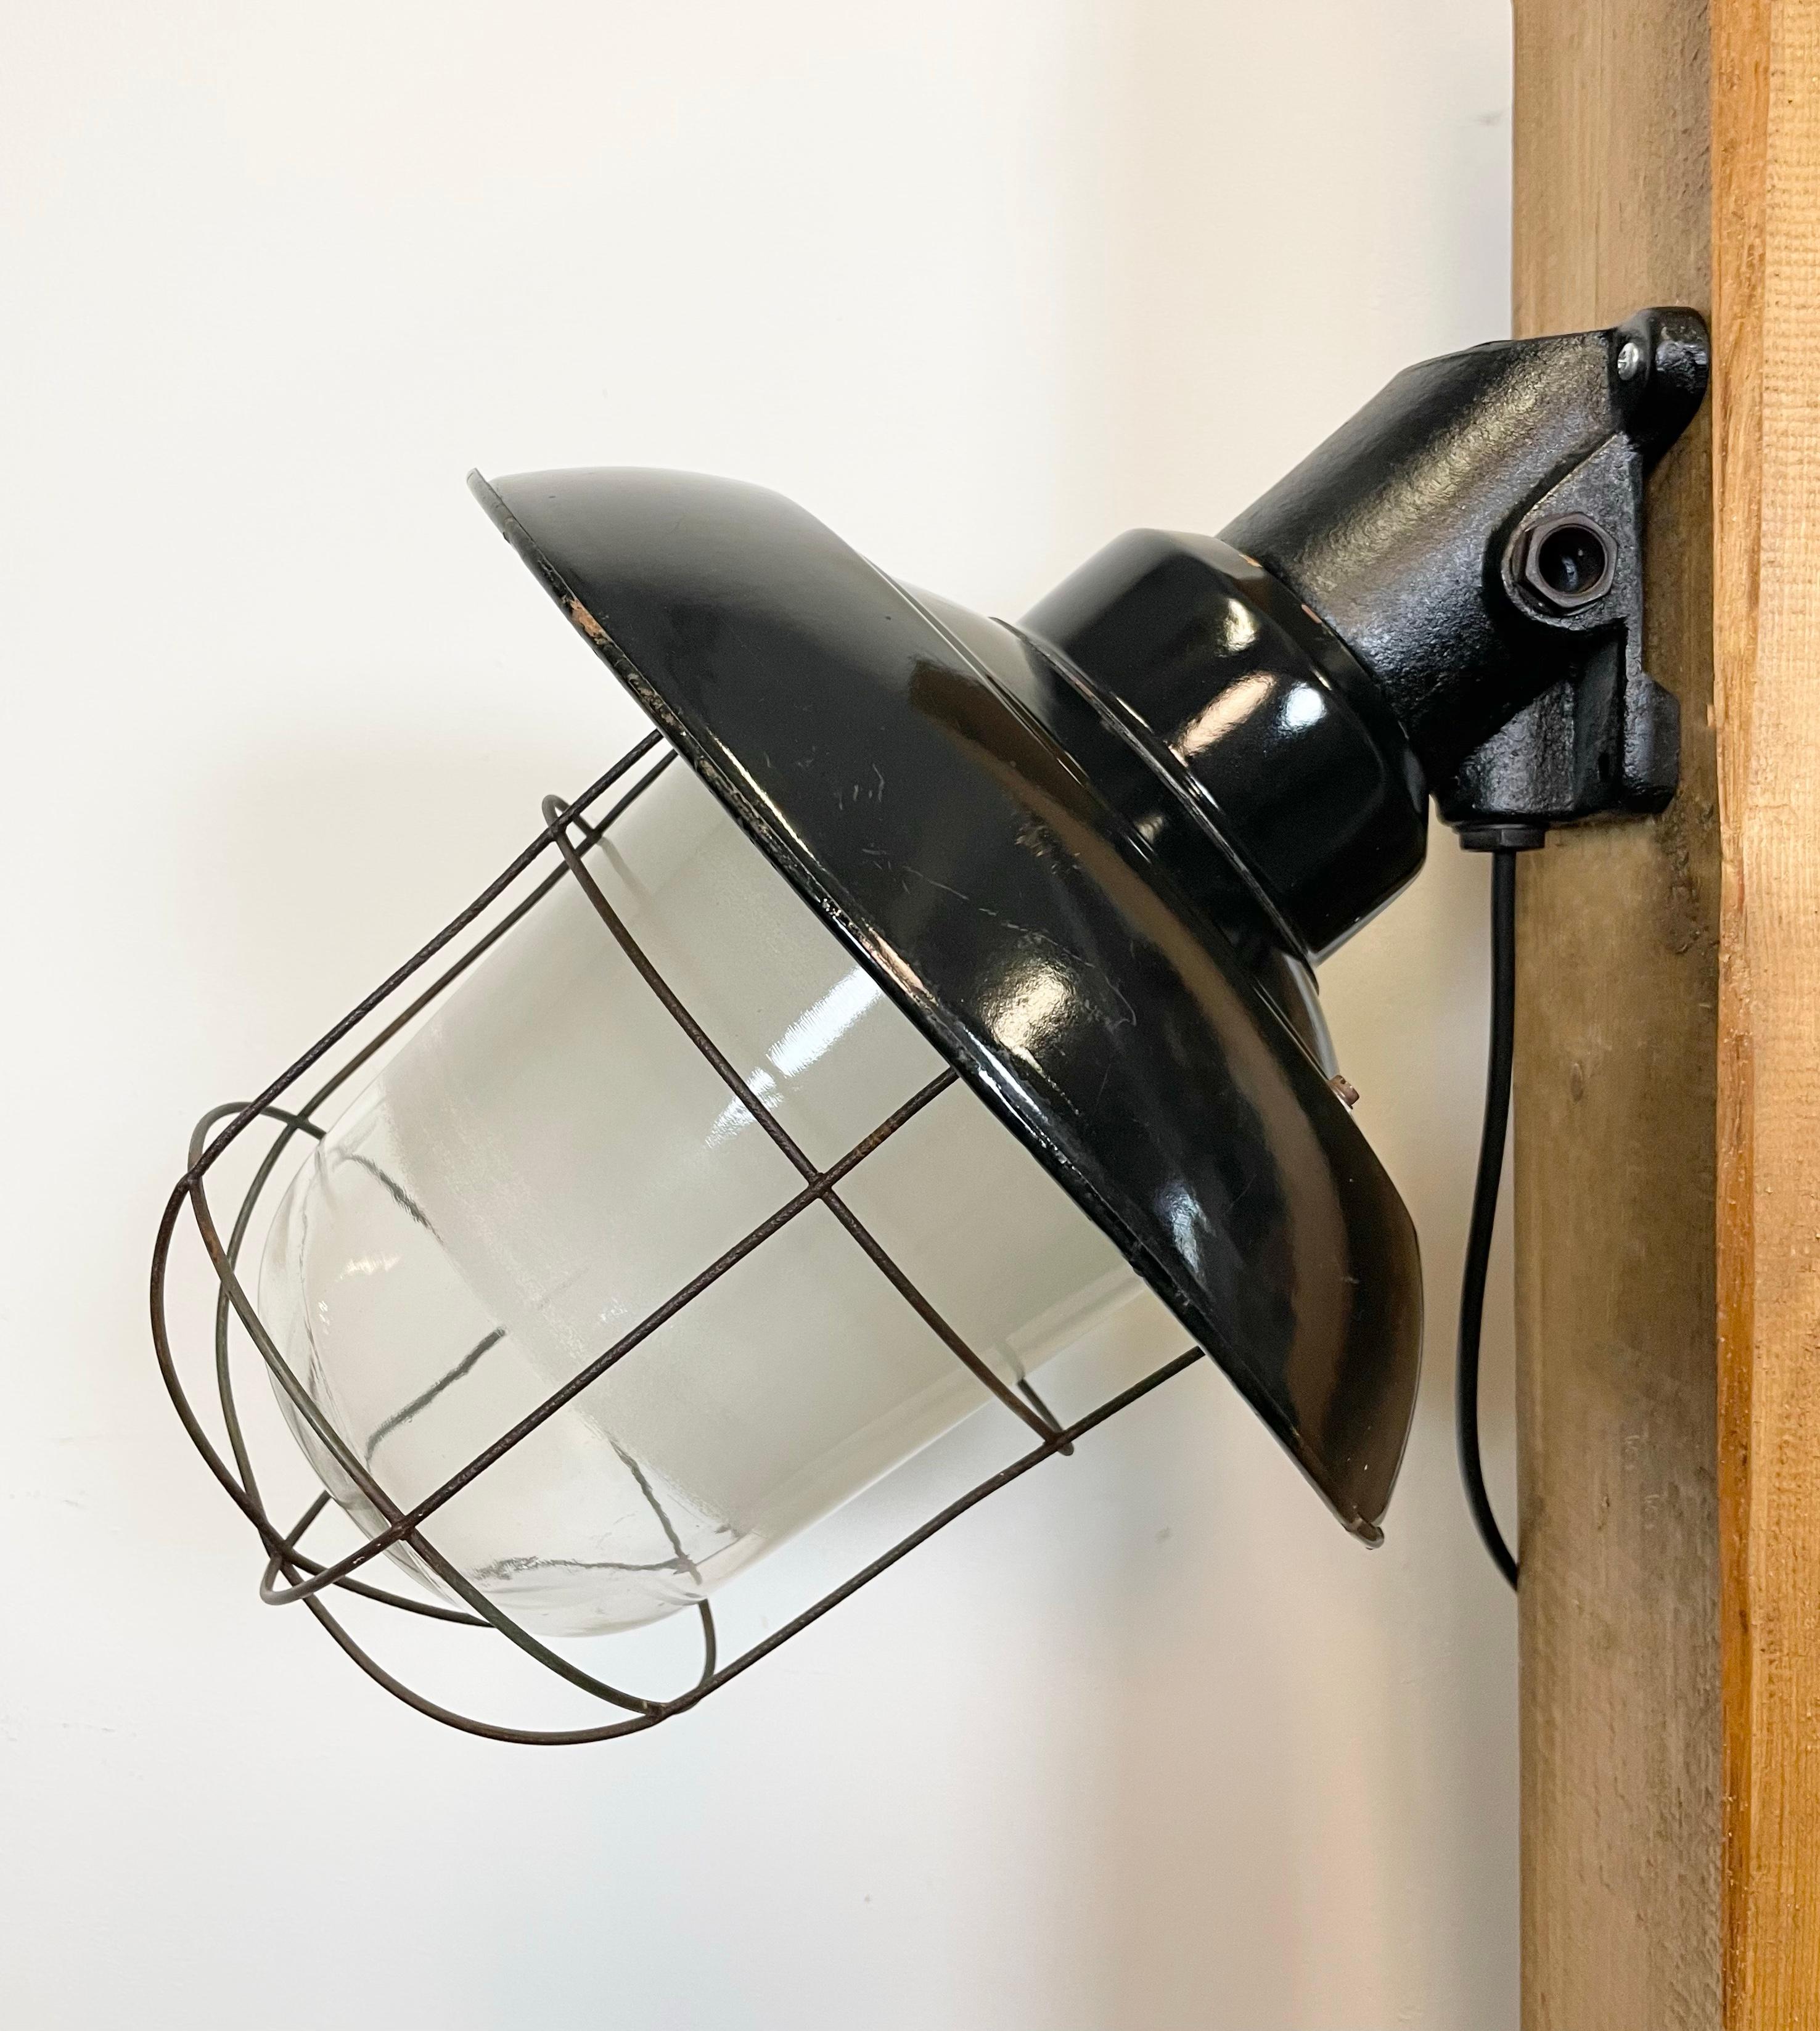 - Industrial wall lamp with cast iron wall mouting from former Czechoslovakia made during the 1960s
- Black enamel shade with white enamel interior, glass cover, iron grid
- New porcelain socket for E 27 light bulbs and wire
- Weight: 5 kg.